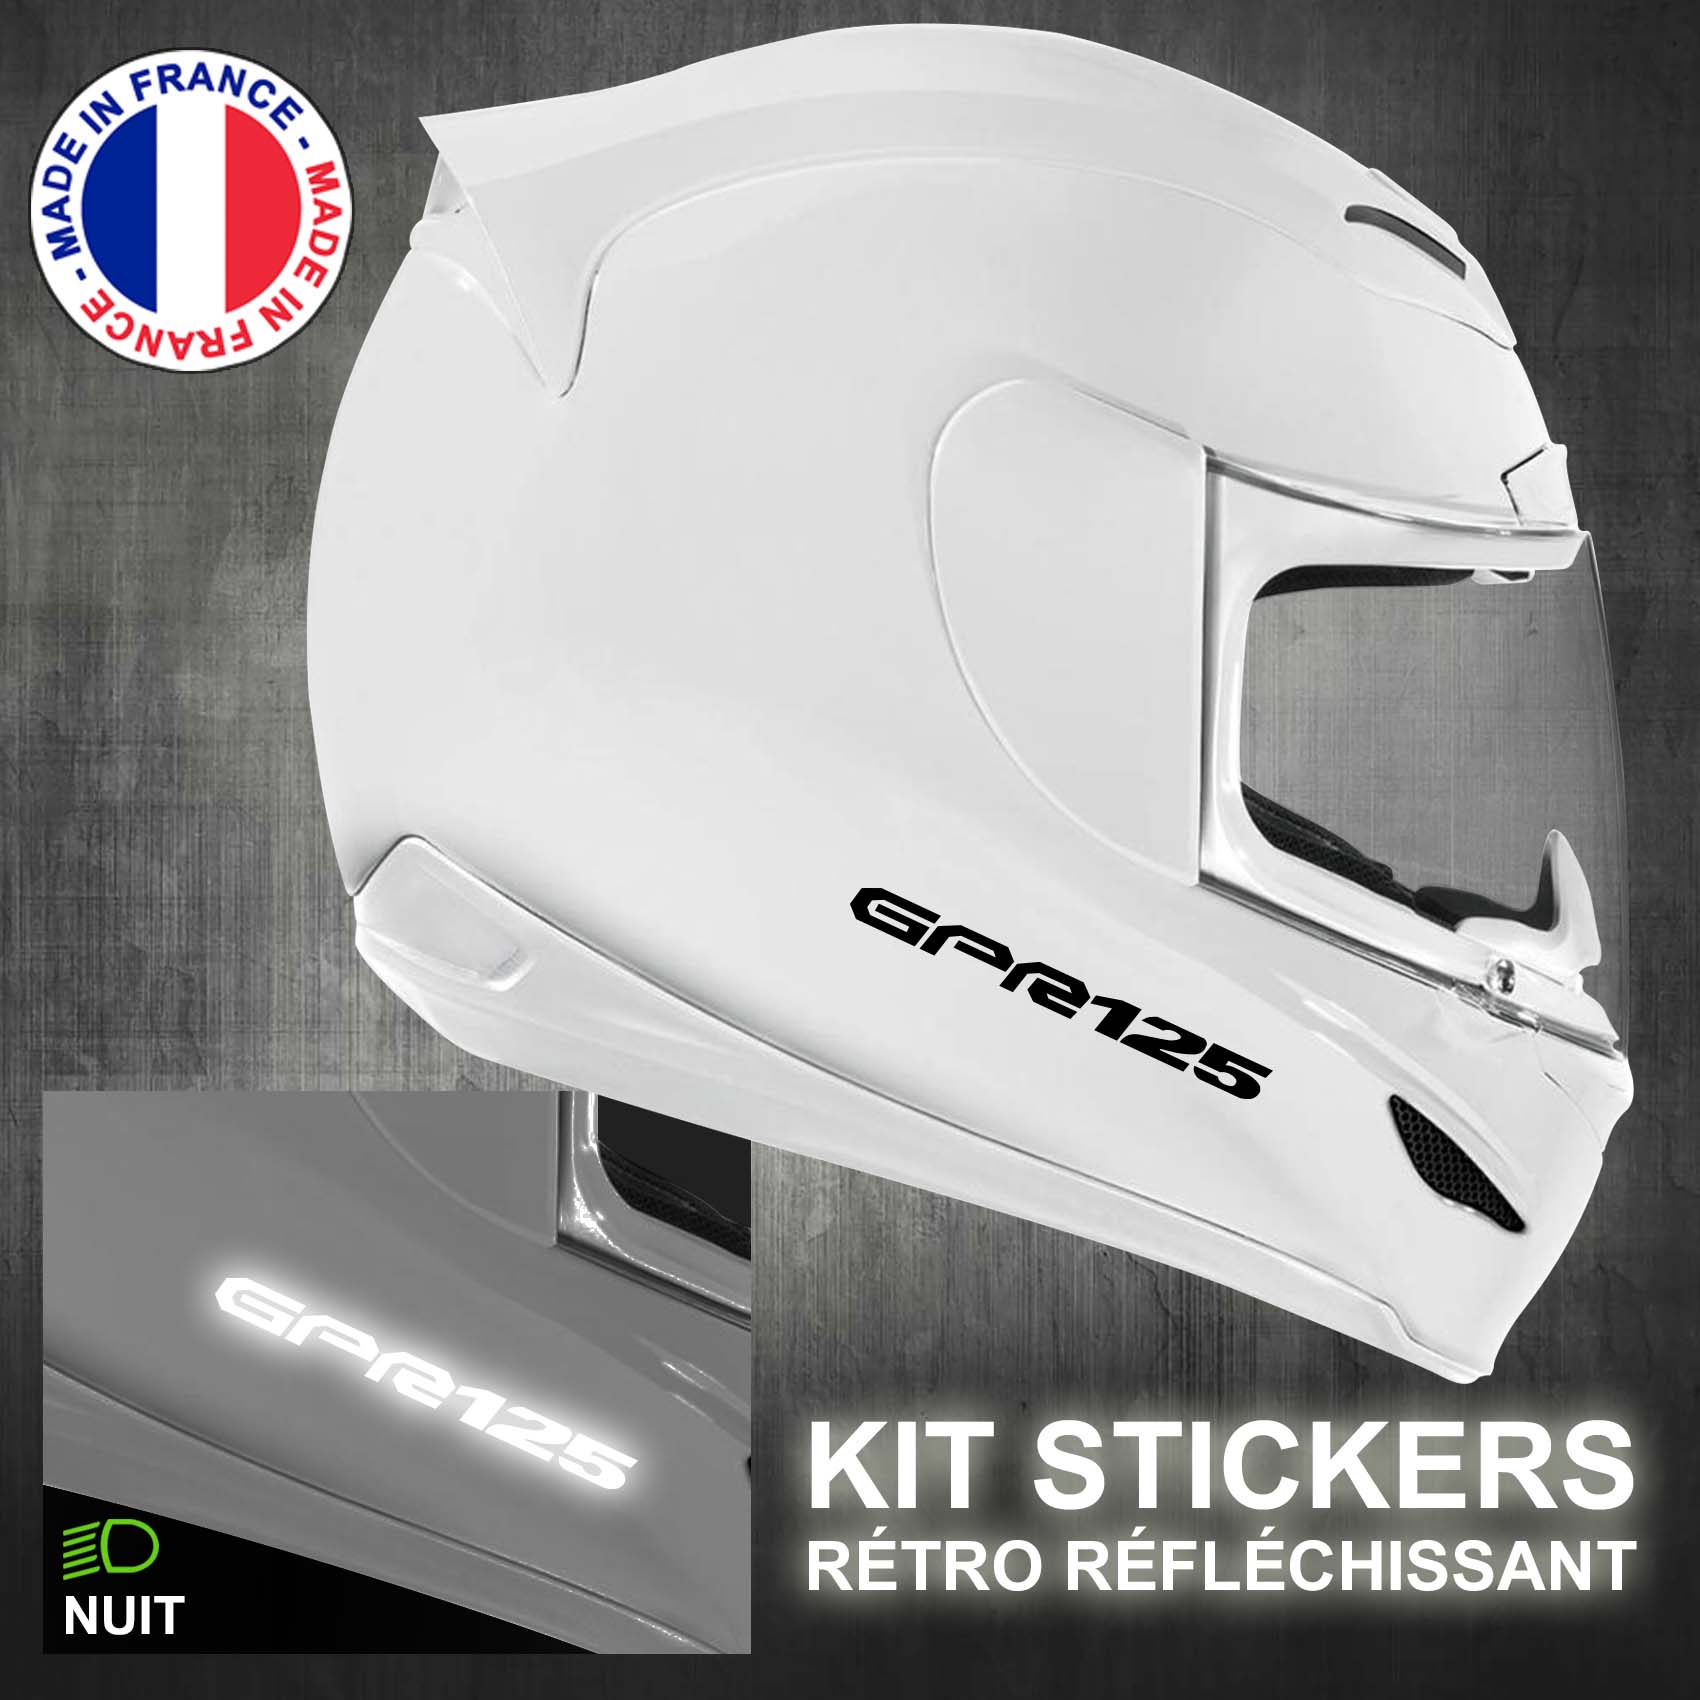 stickers-casque-moto-derbi-gpr-125-ref1-retro-reflechissant-blanc-autocollant-moto-velo-tuning-racing-route-sticker-casques-adhesif-scooter-nuit-securite-decals-personnalise-personnalisable-min